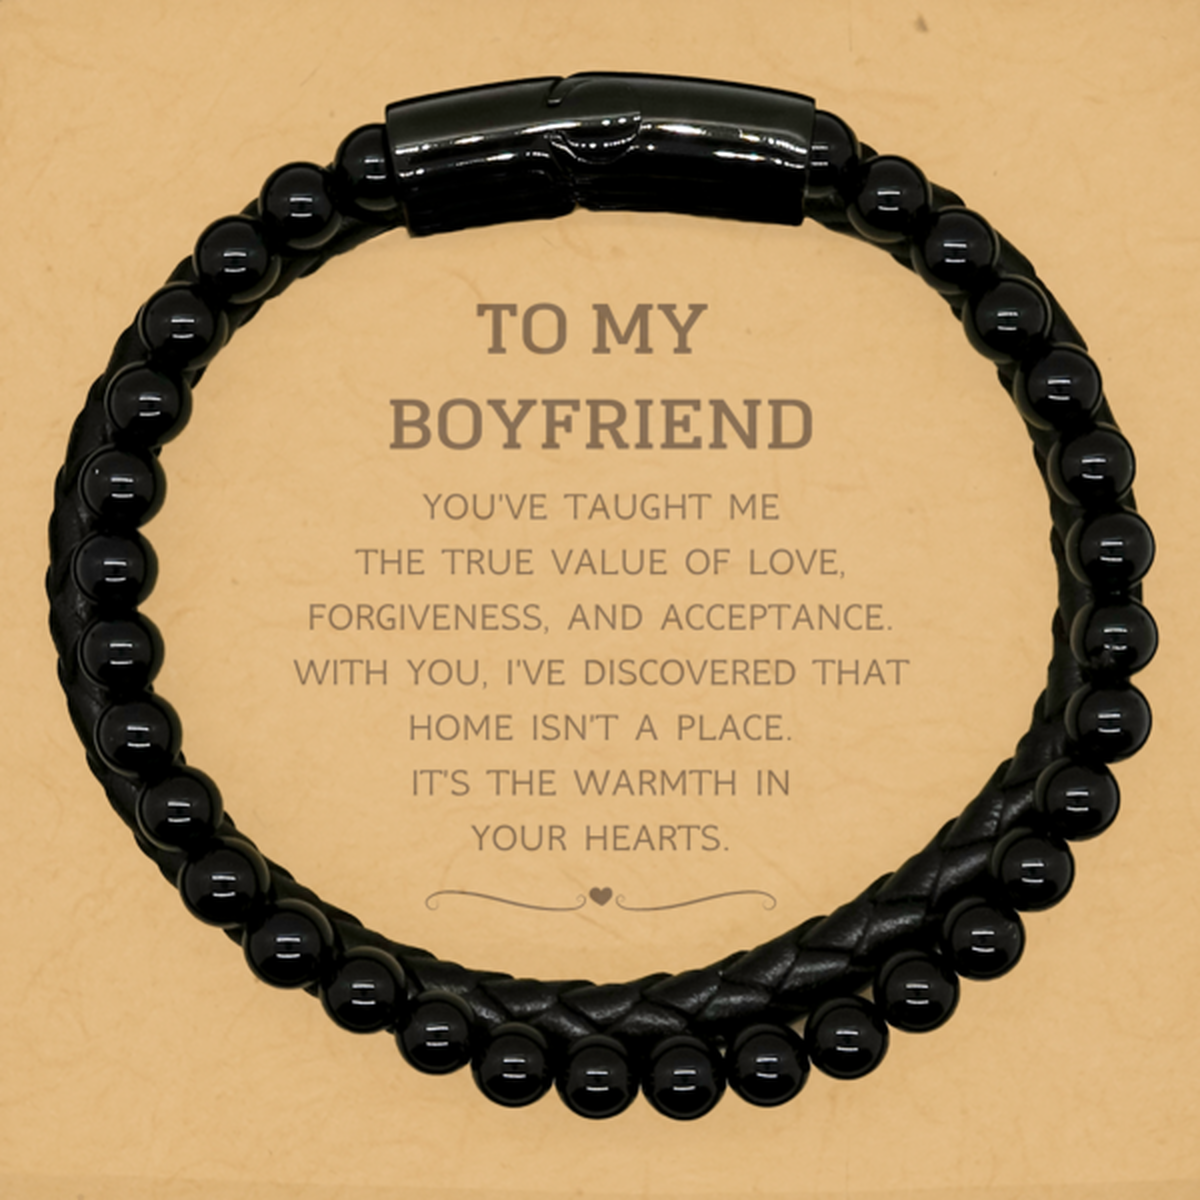 To My Boyfriend Gifts, You've taught me the true value of love, Thank You Gifts For Boyfriend, Birthday Stone Leather Bracelets For Boyfriend